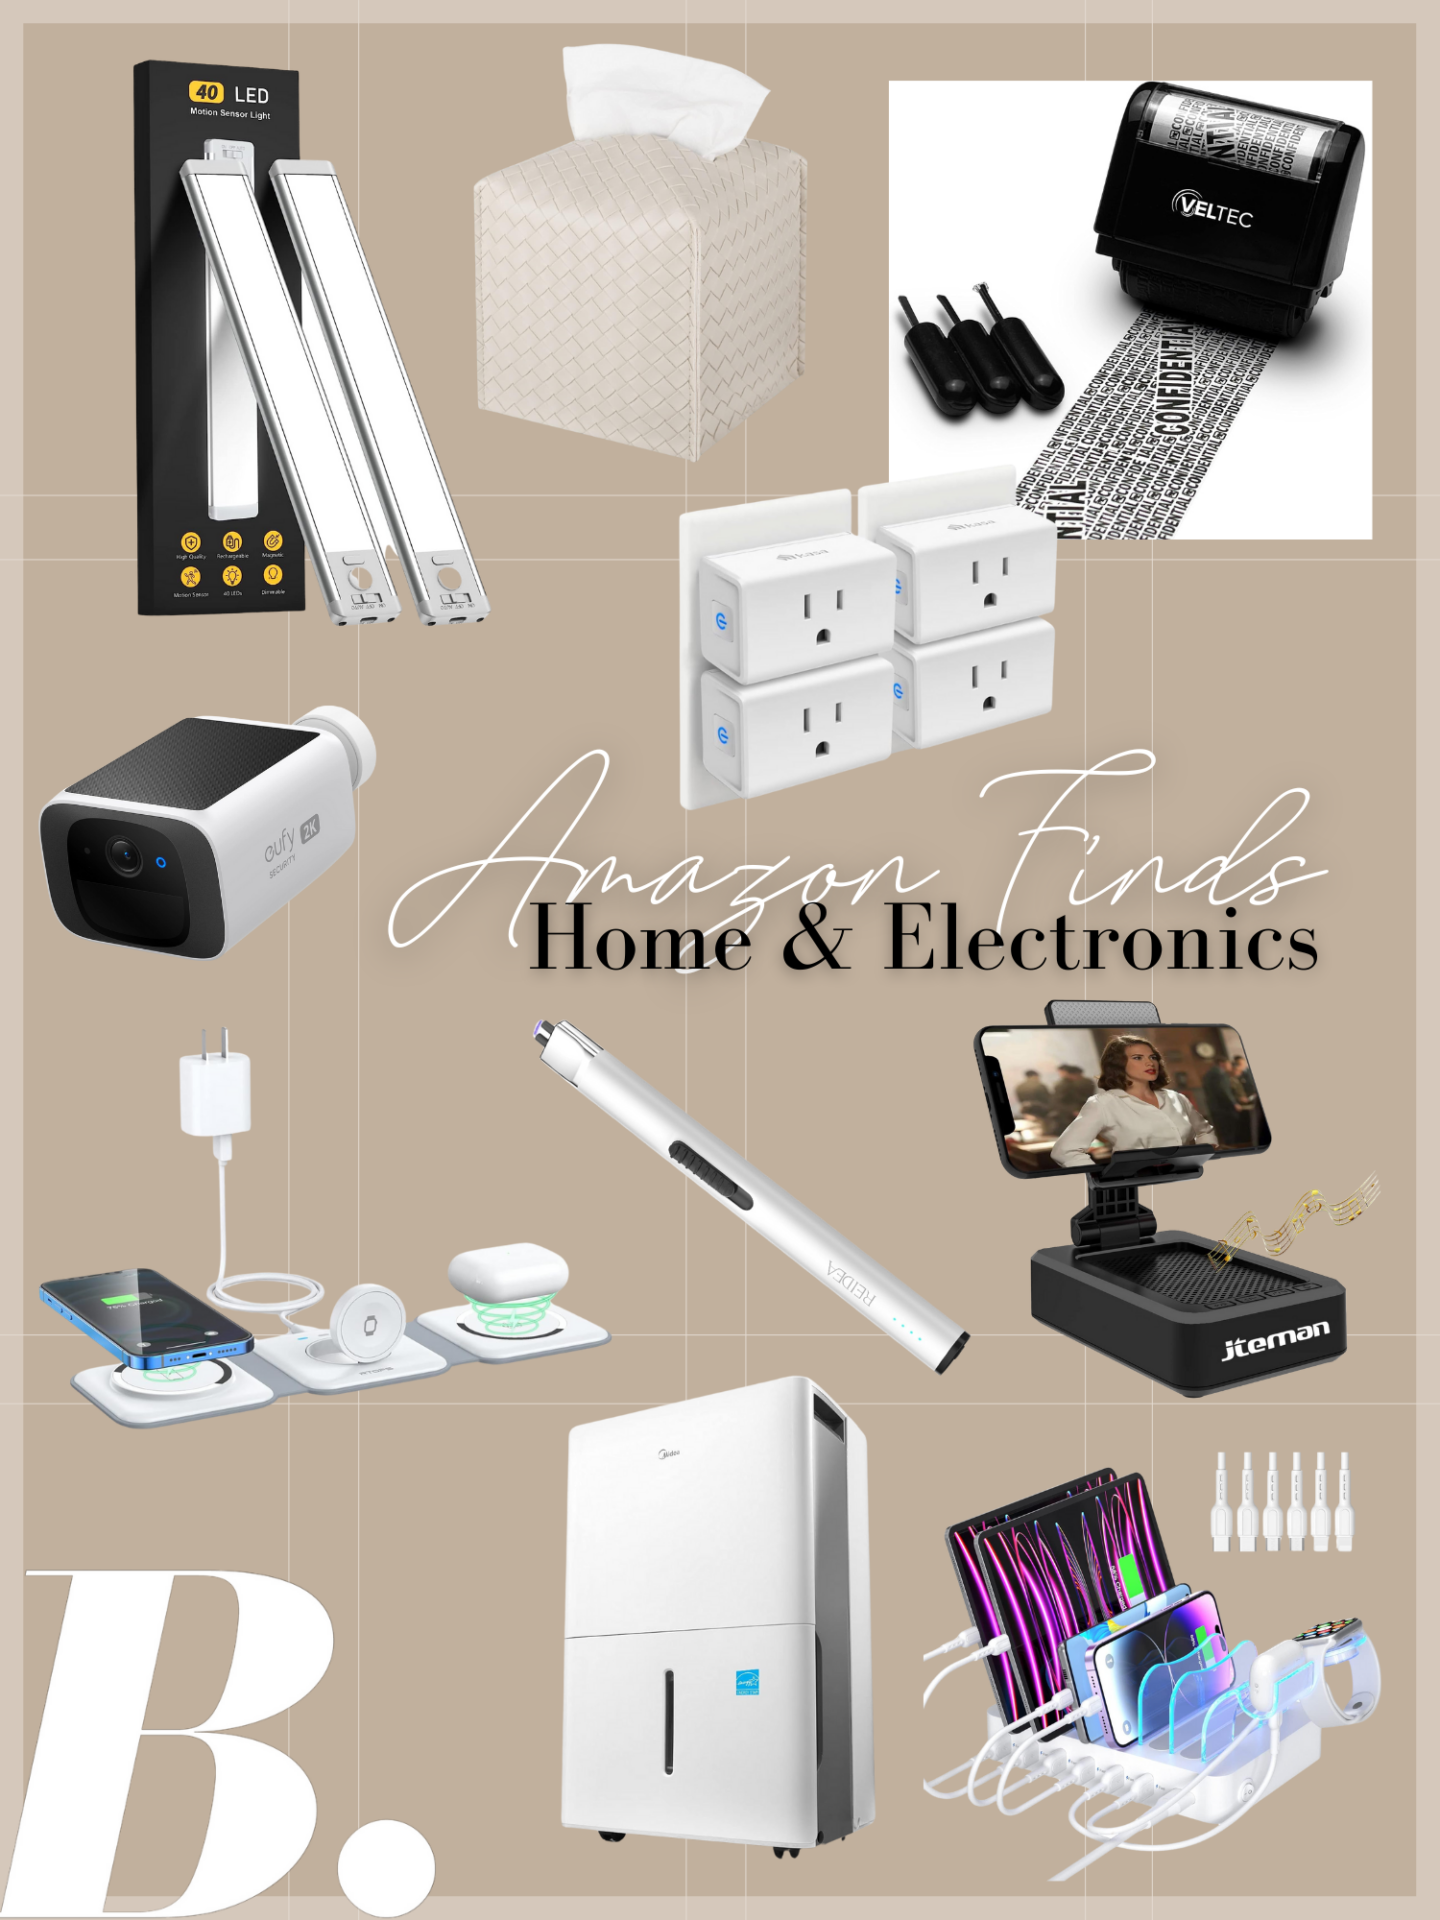 Home & Electronics products